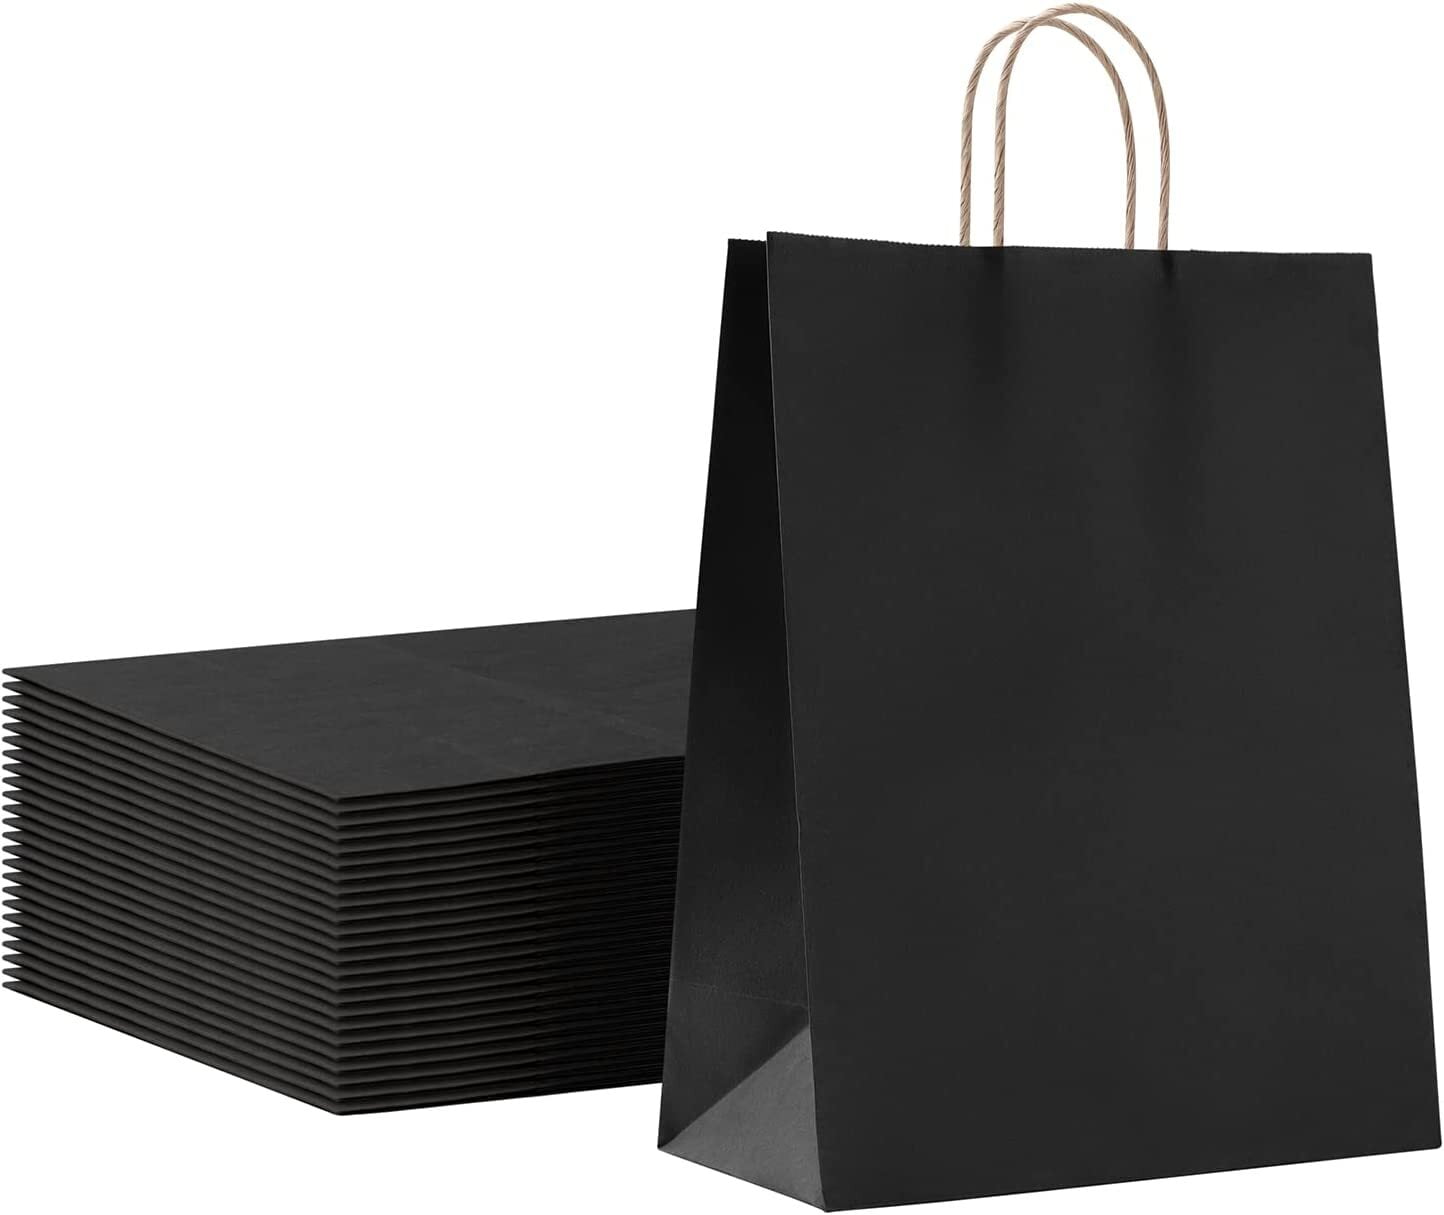  MESHA Paper Gift Bags 5.25x3.75x8 Black Small Paper Bags with  Handles Bulk,100 Pcs Kraft Paper Bags for Small Business,Wedding Party  Favor Bags : Health & Household